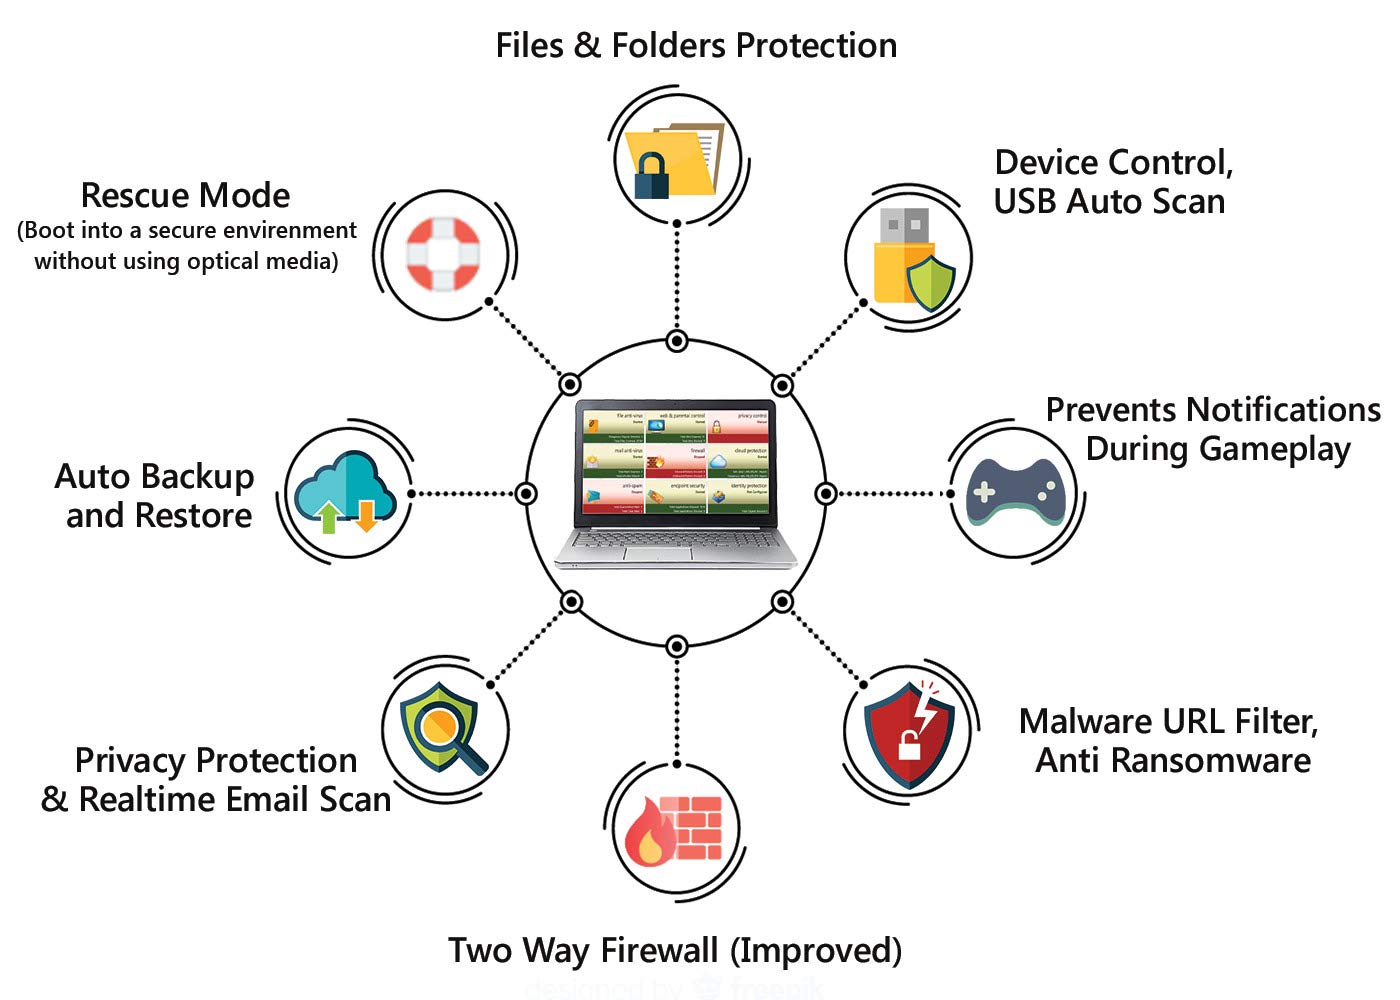 eScan Total Security Suite with Cloud Security Web Security Improves system performance Prevents USB infection | 3 Devices 1 Year|total protection 2019 Anti Ransomware Antitheft for stolen/lost device